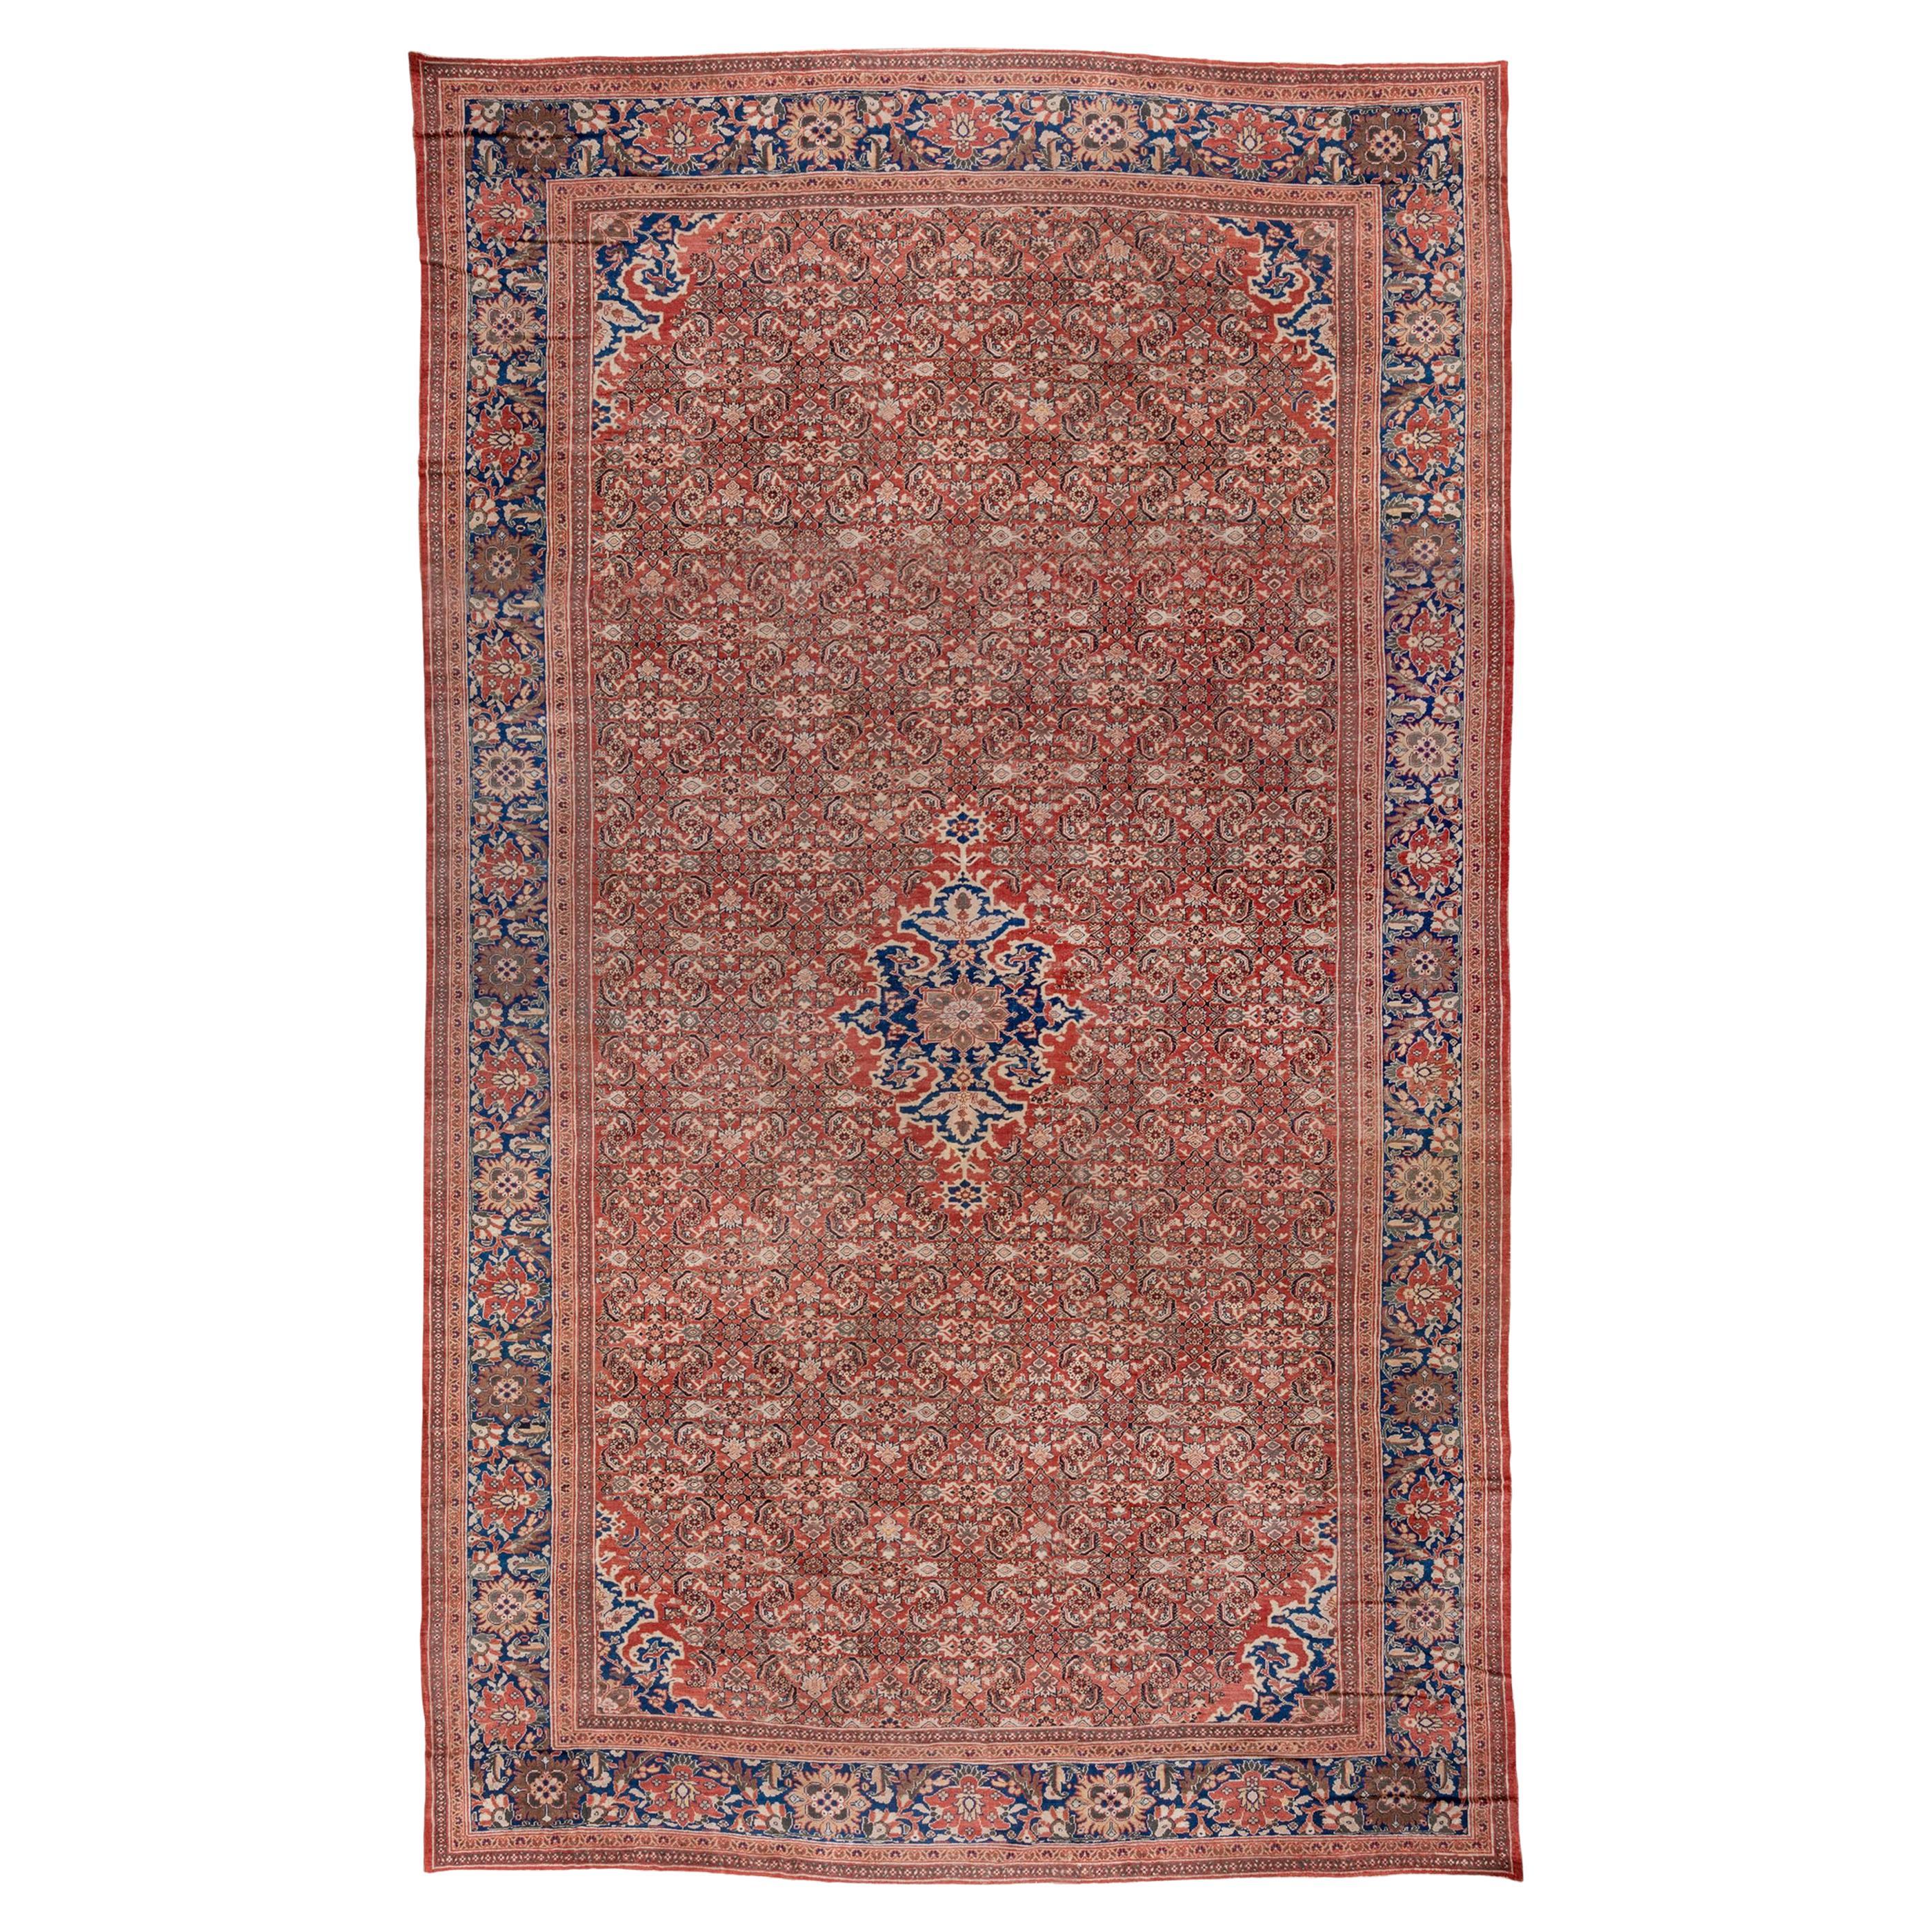 Stunning Antique Red Persian Sultanabad Mansion Carpet, Red Outer Field, 1900s